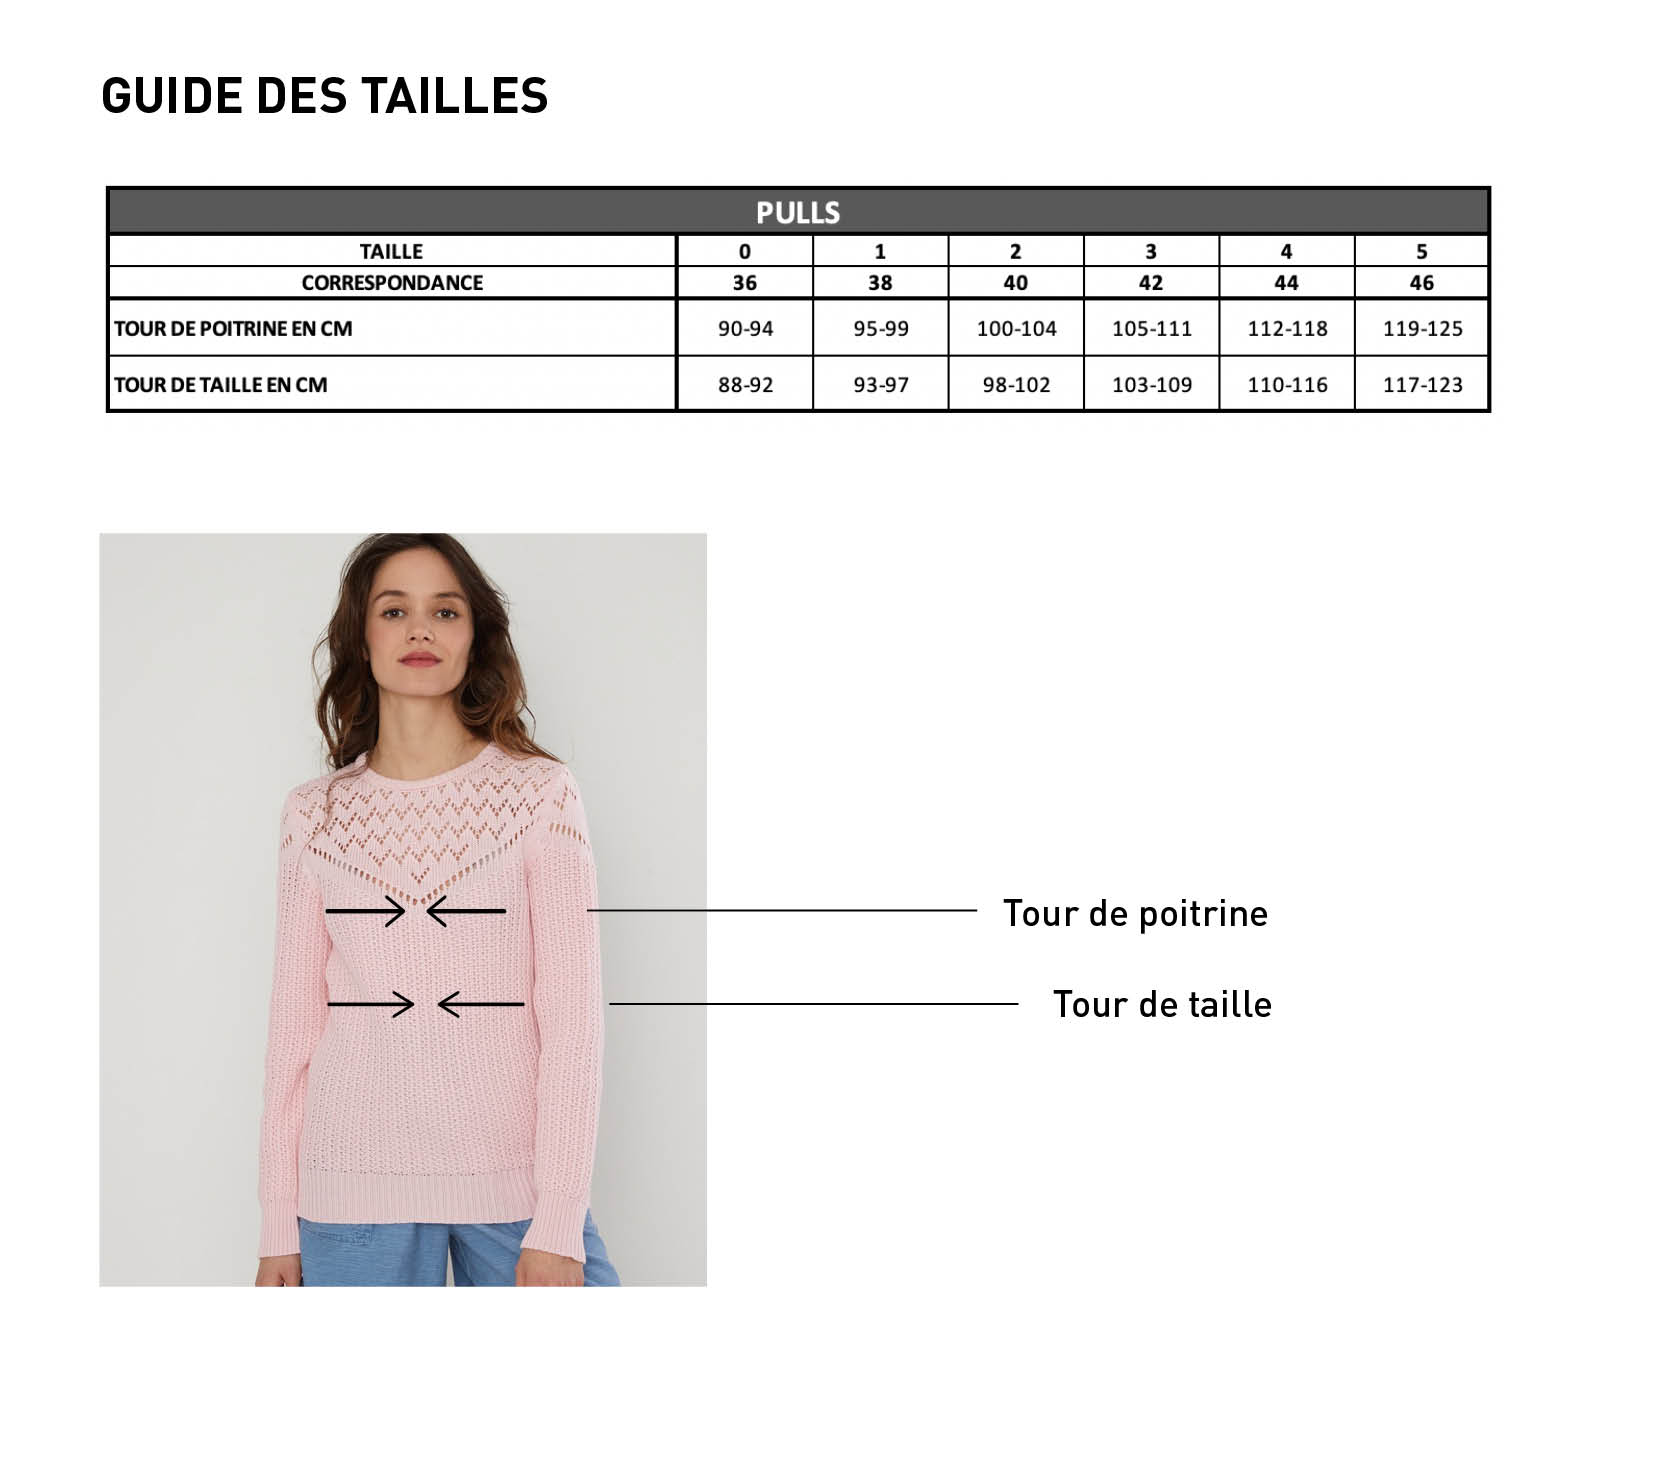 Guide des tailles pull femme